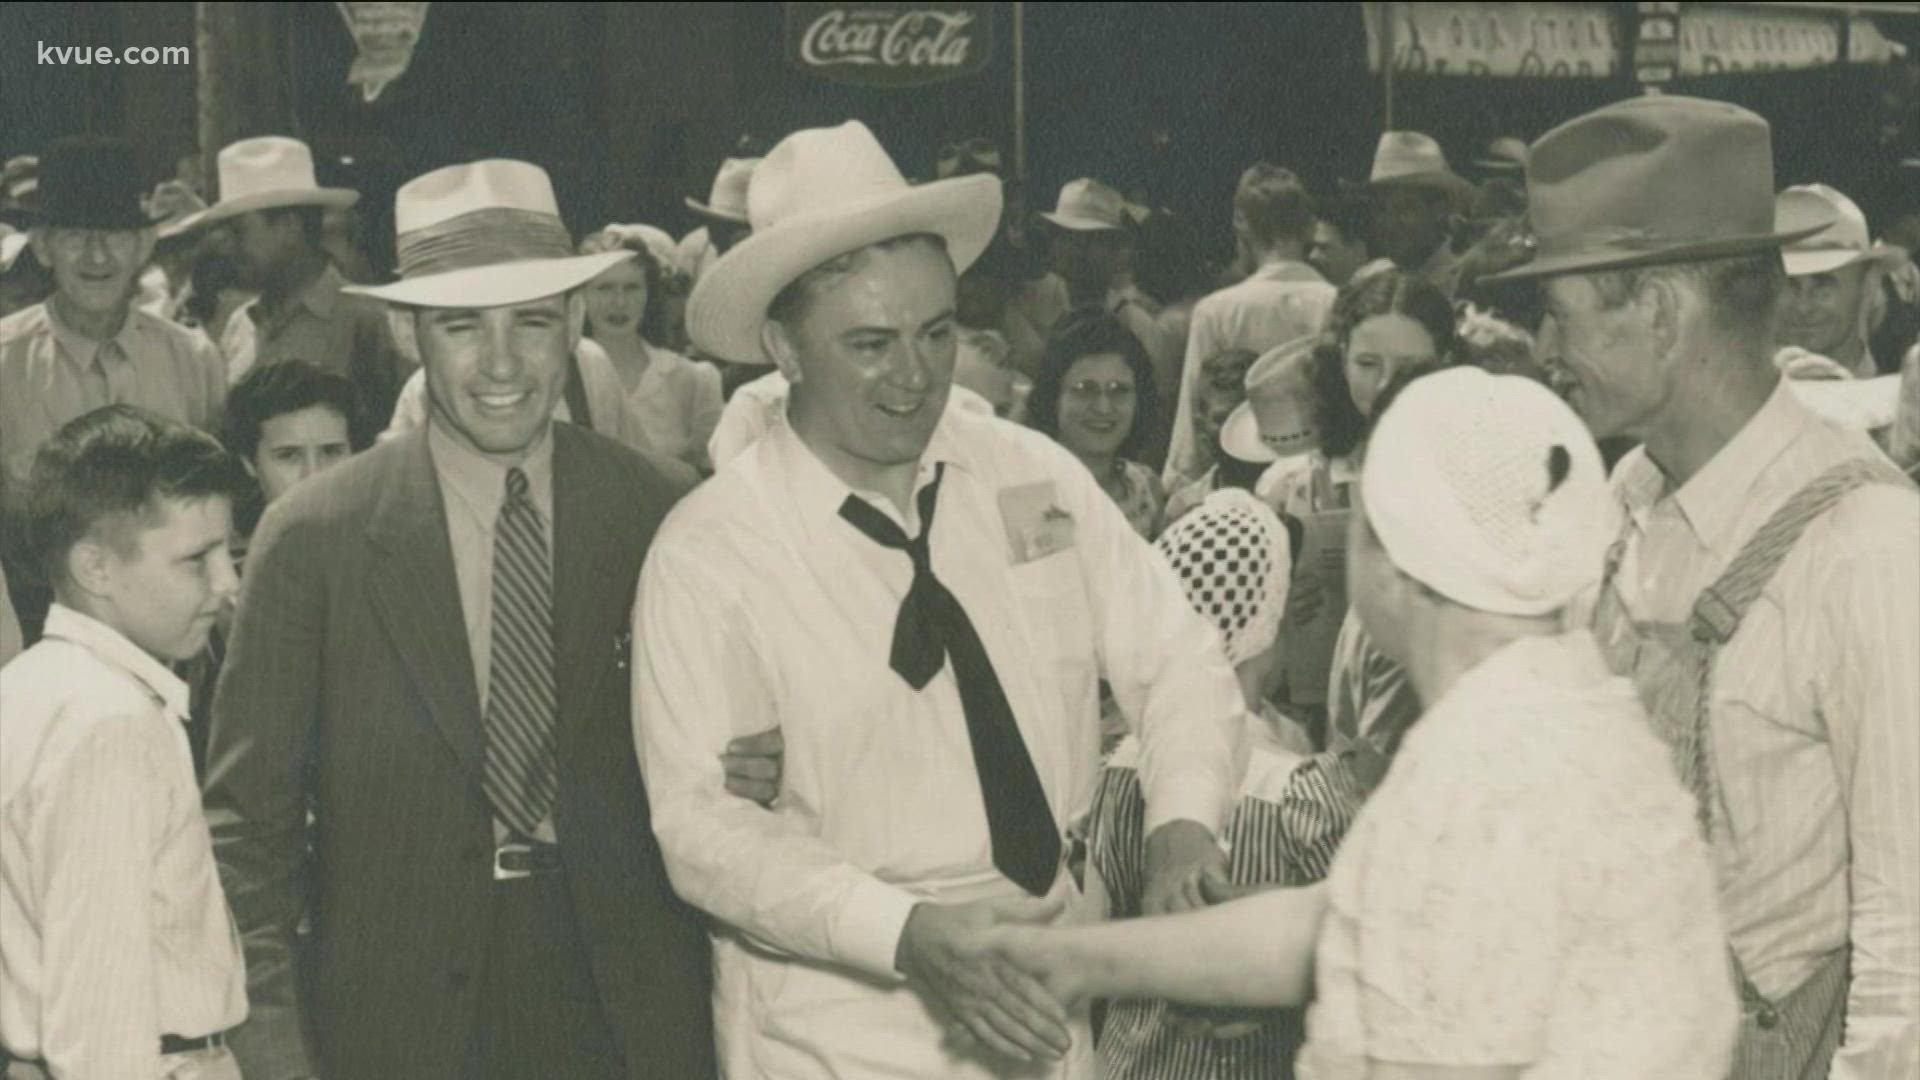 Governor W. Lee O'Daniel was popular for his swing band heard on the radio across the Lone Star State every day.